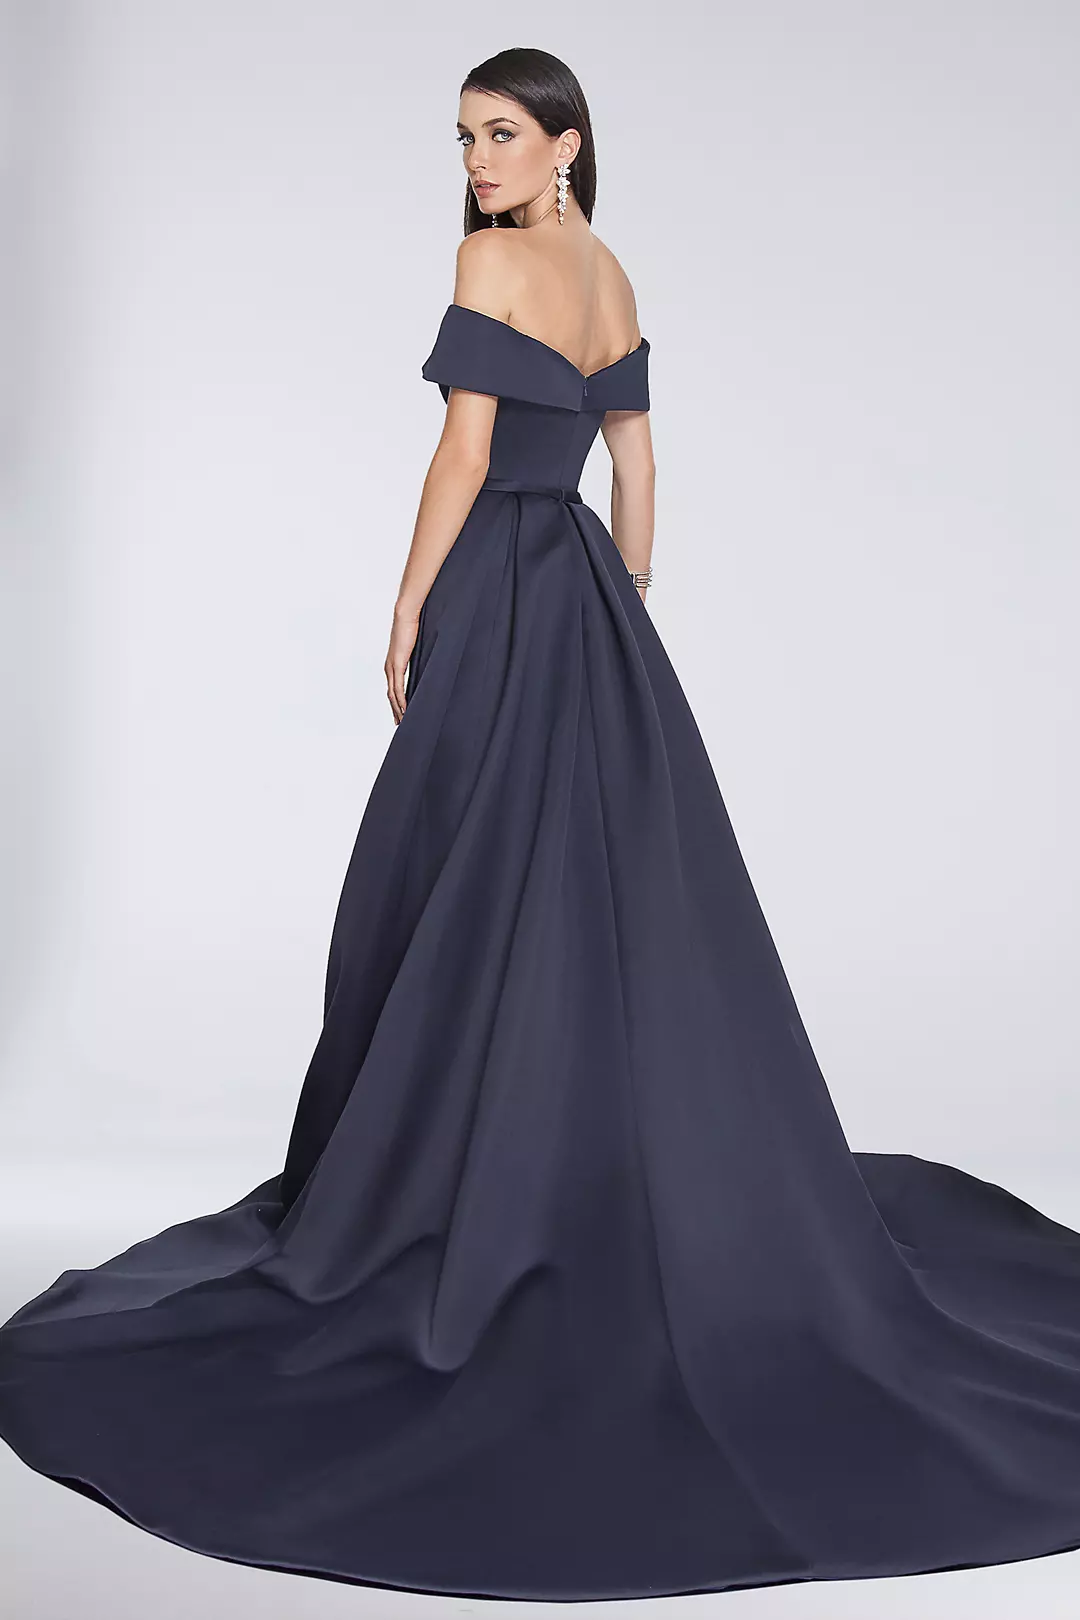 Off-the-Shoulder Satin Ball Gown with Train | David's Bridal